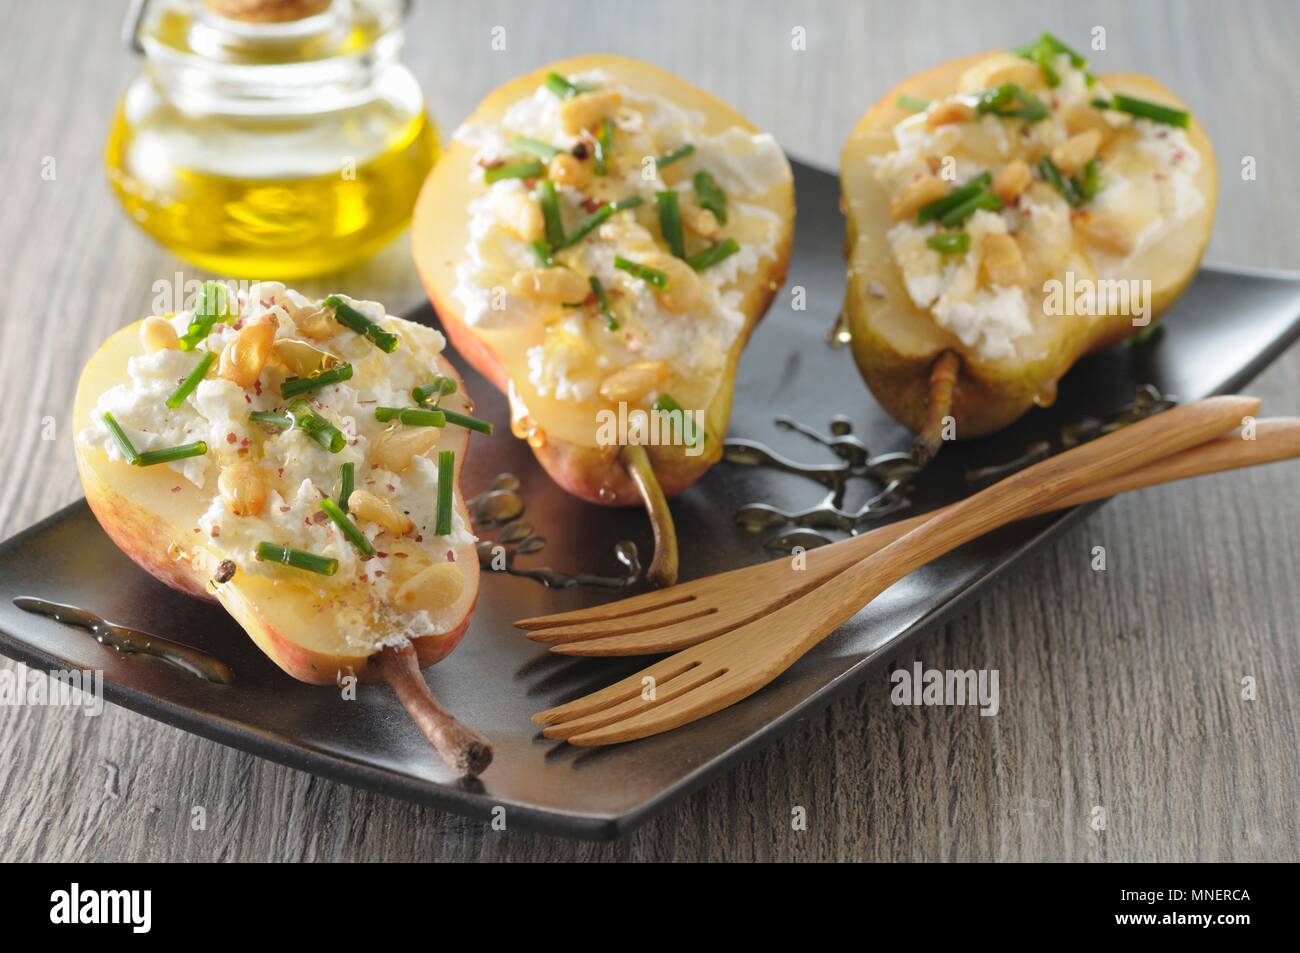 Stuff pears with goat's cheese and pine nuts Stock Photo